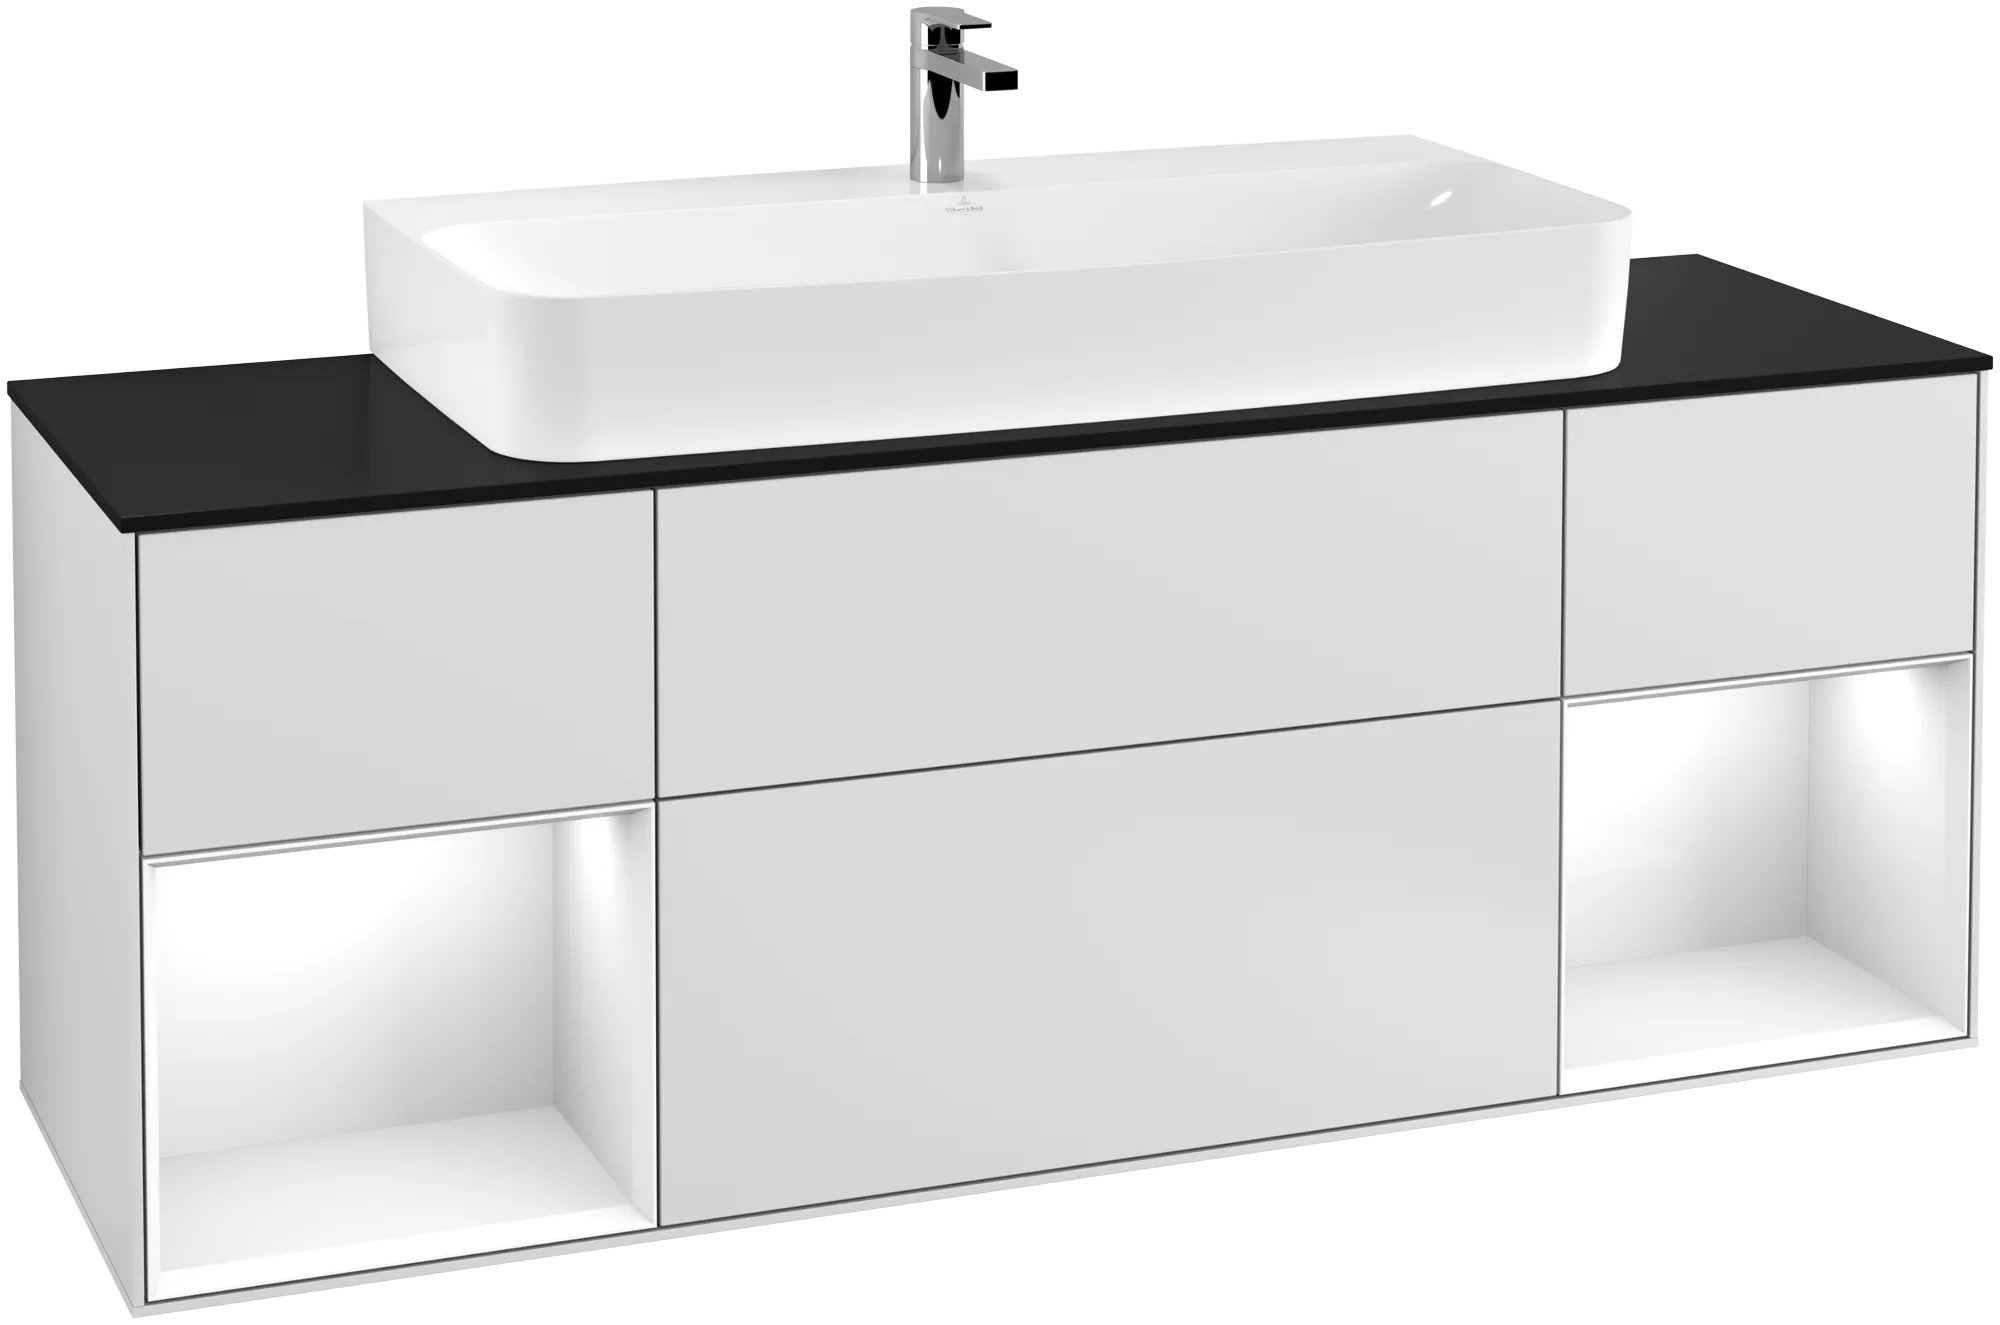 VILLEROY BOCH Finion Vanity unit, with lighting, 4 pull-out compartments, 1600 x 603 x 501 mm, White Matt Lacquer / Glossy White Lacquer / Glass Black Matt #G212GFMT resmi